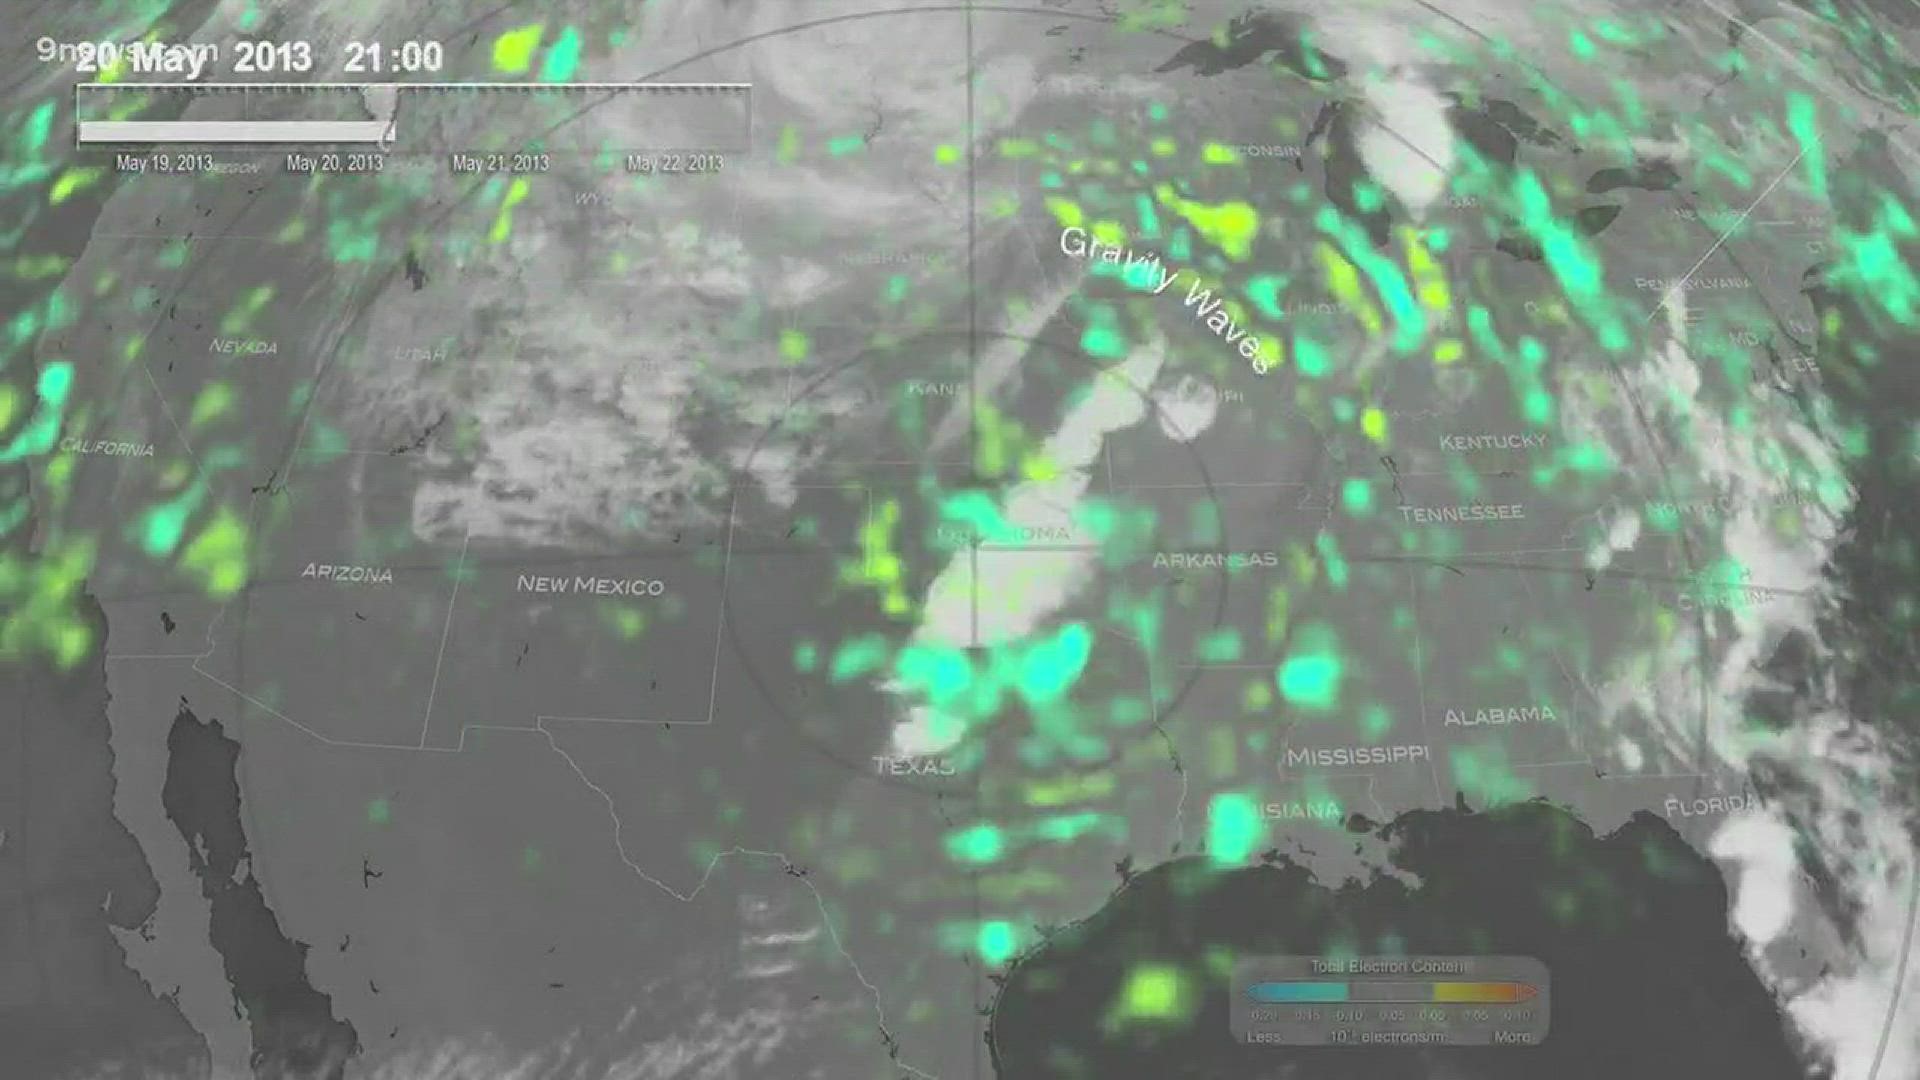 NASA scientists say they have found a new way to detect waves that could potentially warn of tornadoes and that could give more time to warn people about dangerous storms as they form.